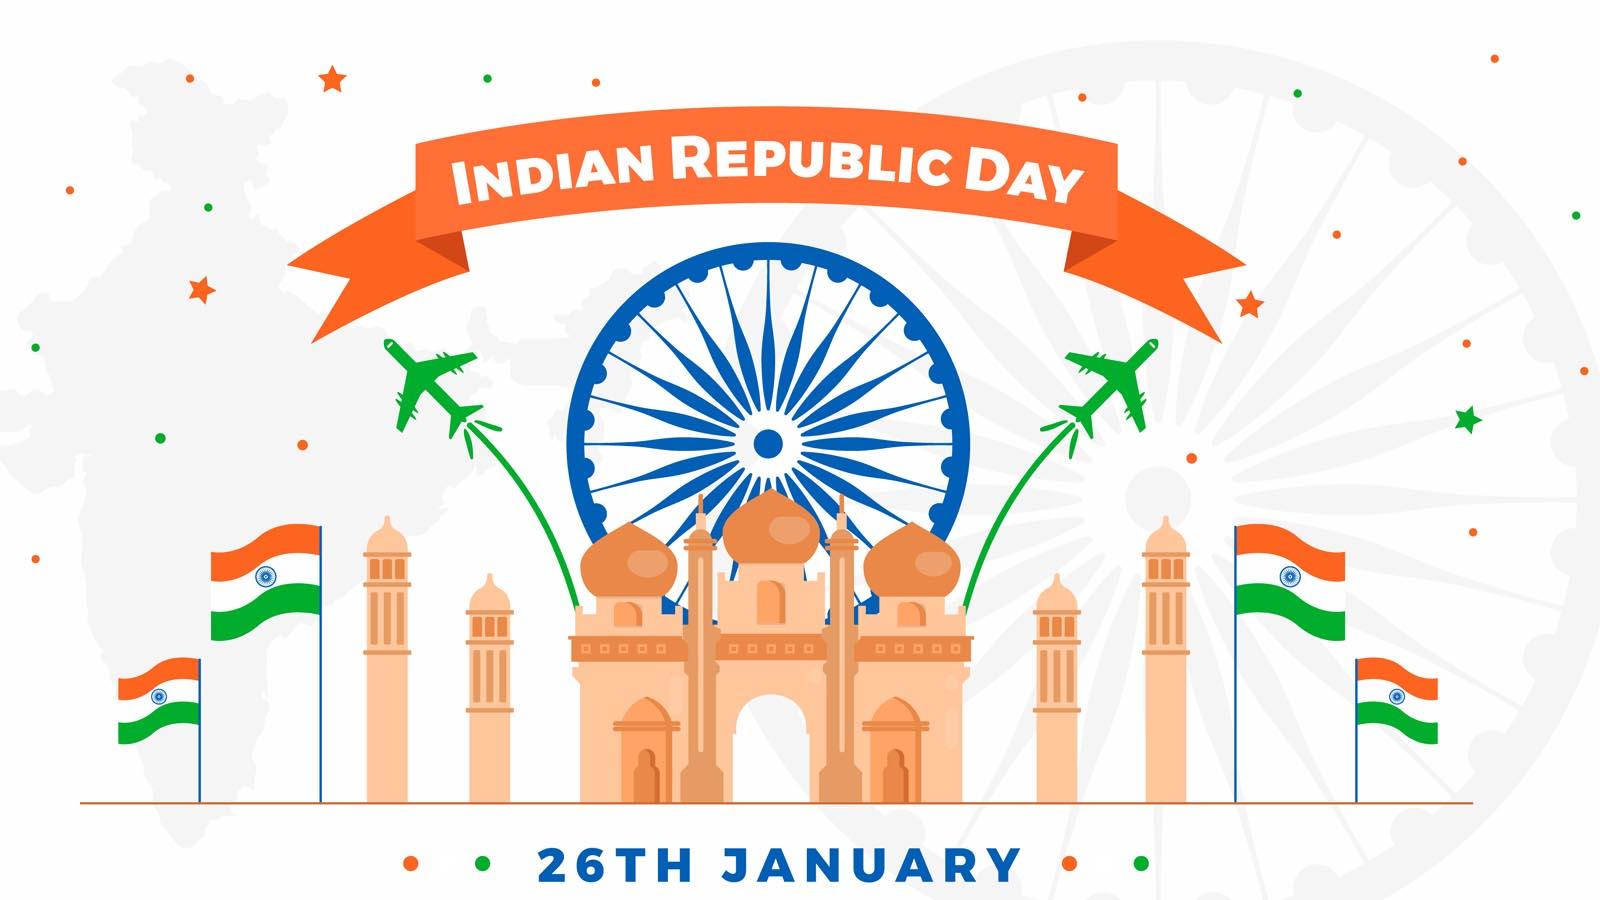 Lines on Republic Day Gantantra Diwas of India in Hindi and English